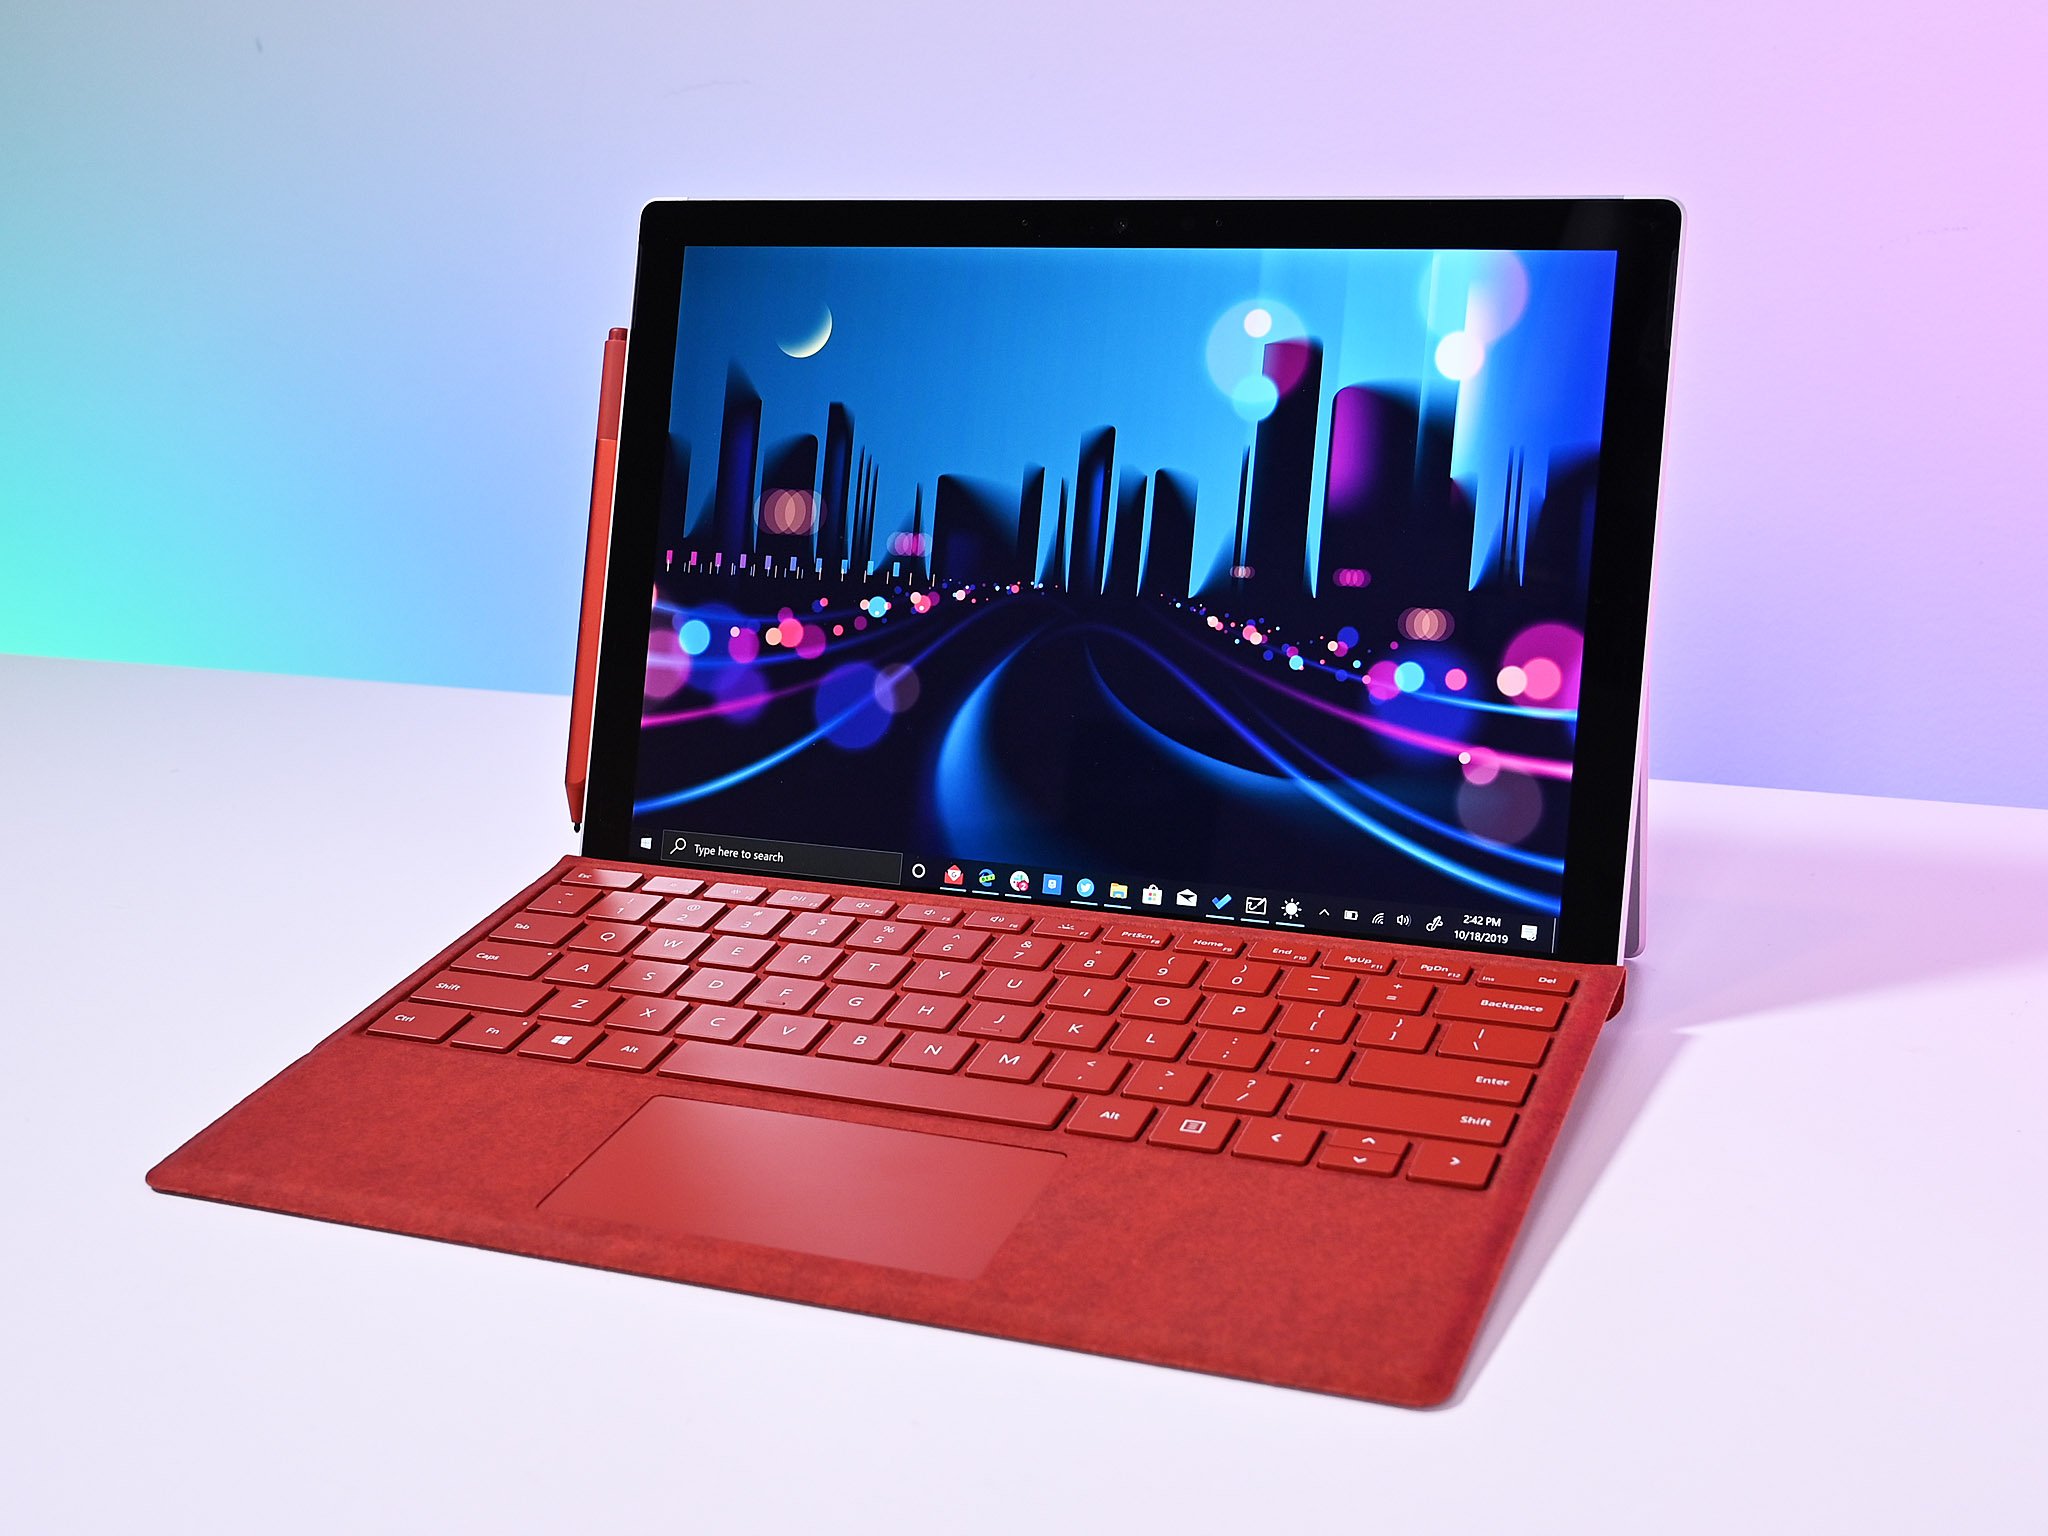 https://www.windowscentral.com/sites/wpcentral.com/files/styles/large_wm_brb/public/field/image/2019/10/surface-pro-7-review-hero.jpg?itok=EWGnjARn